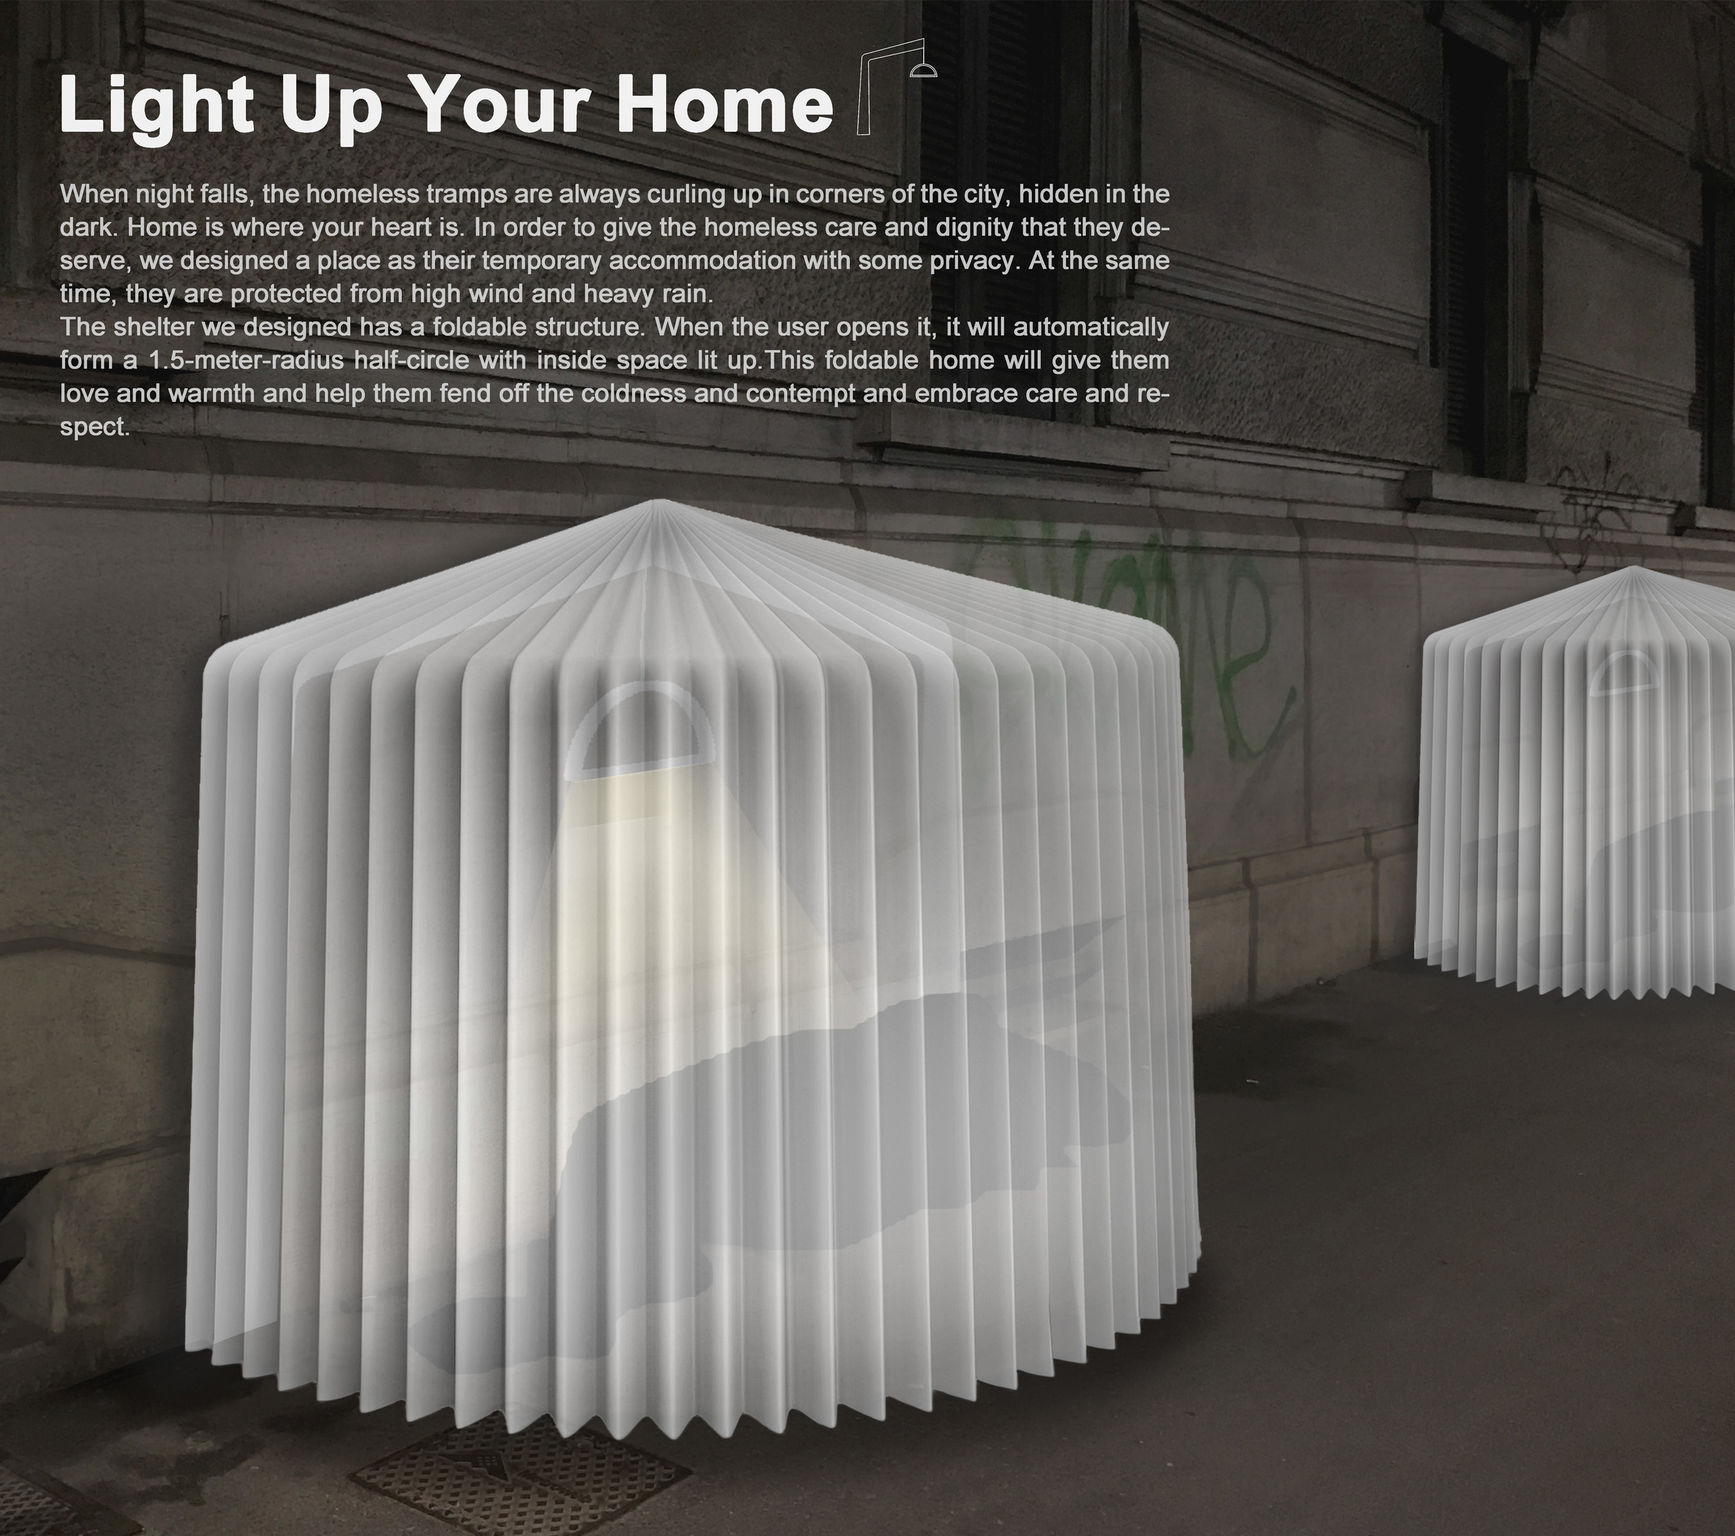 Light Up Your Home